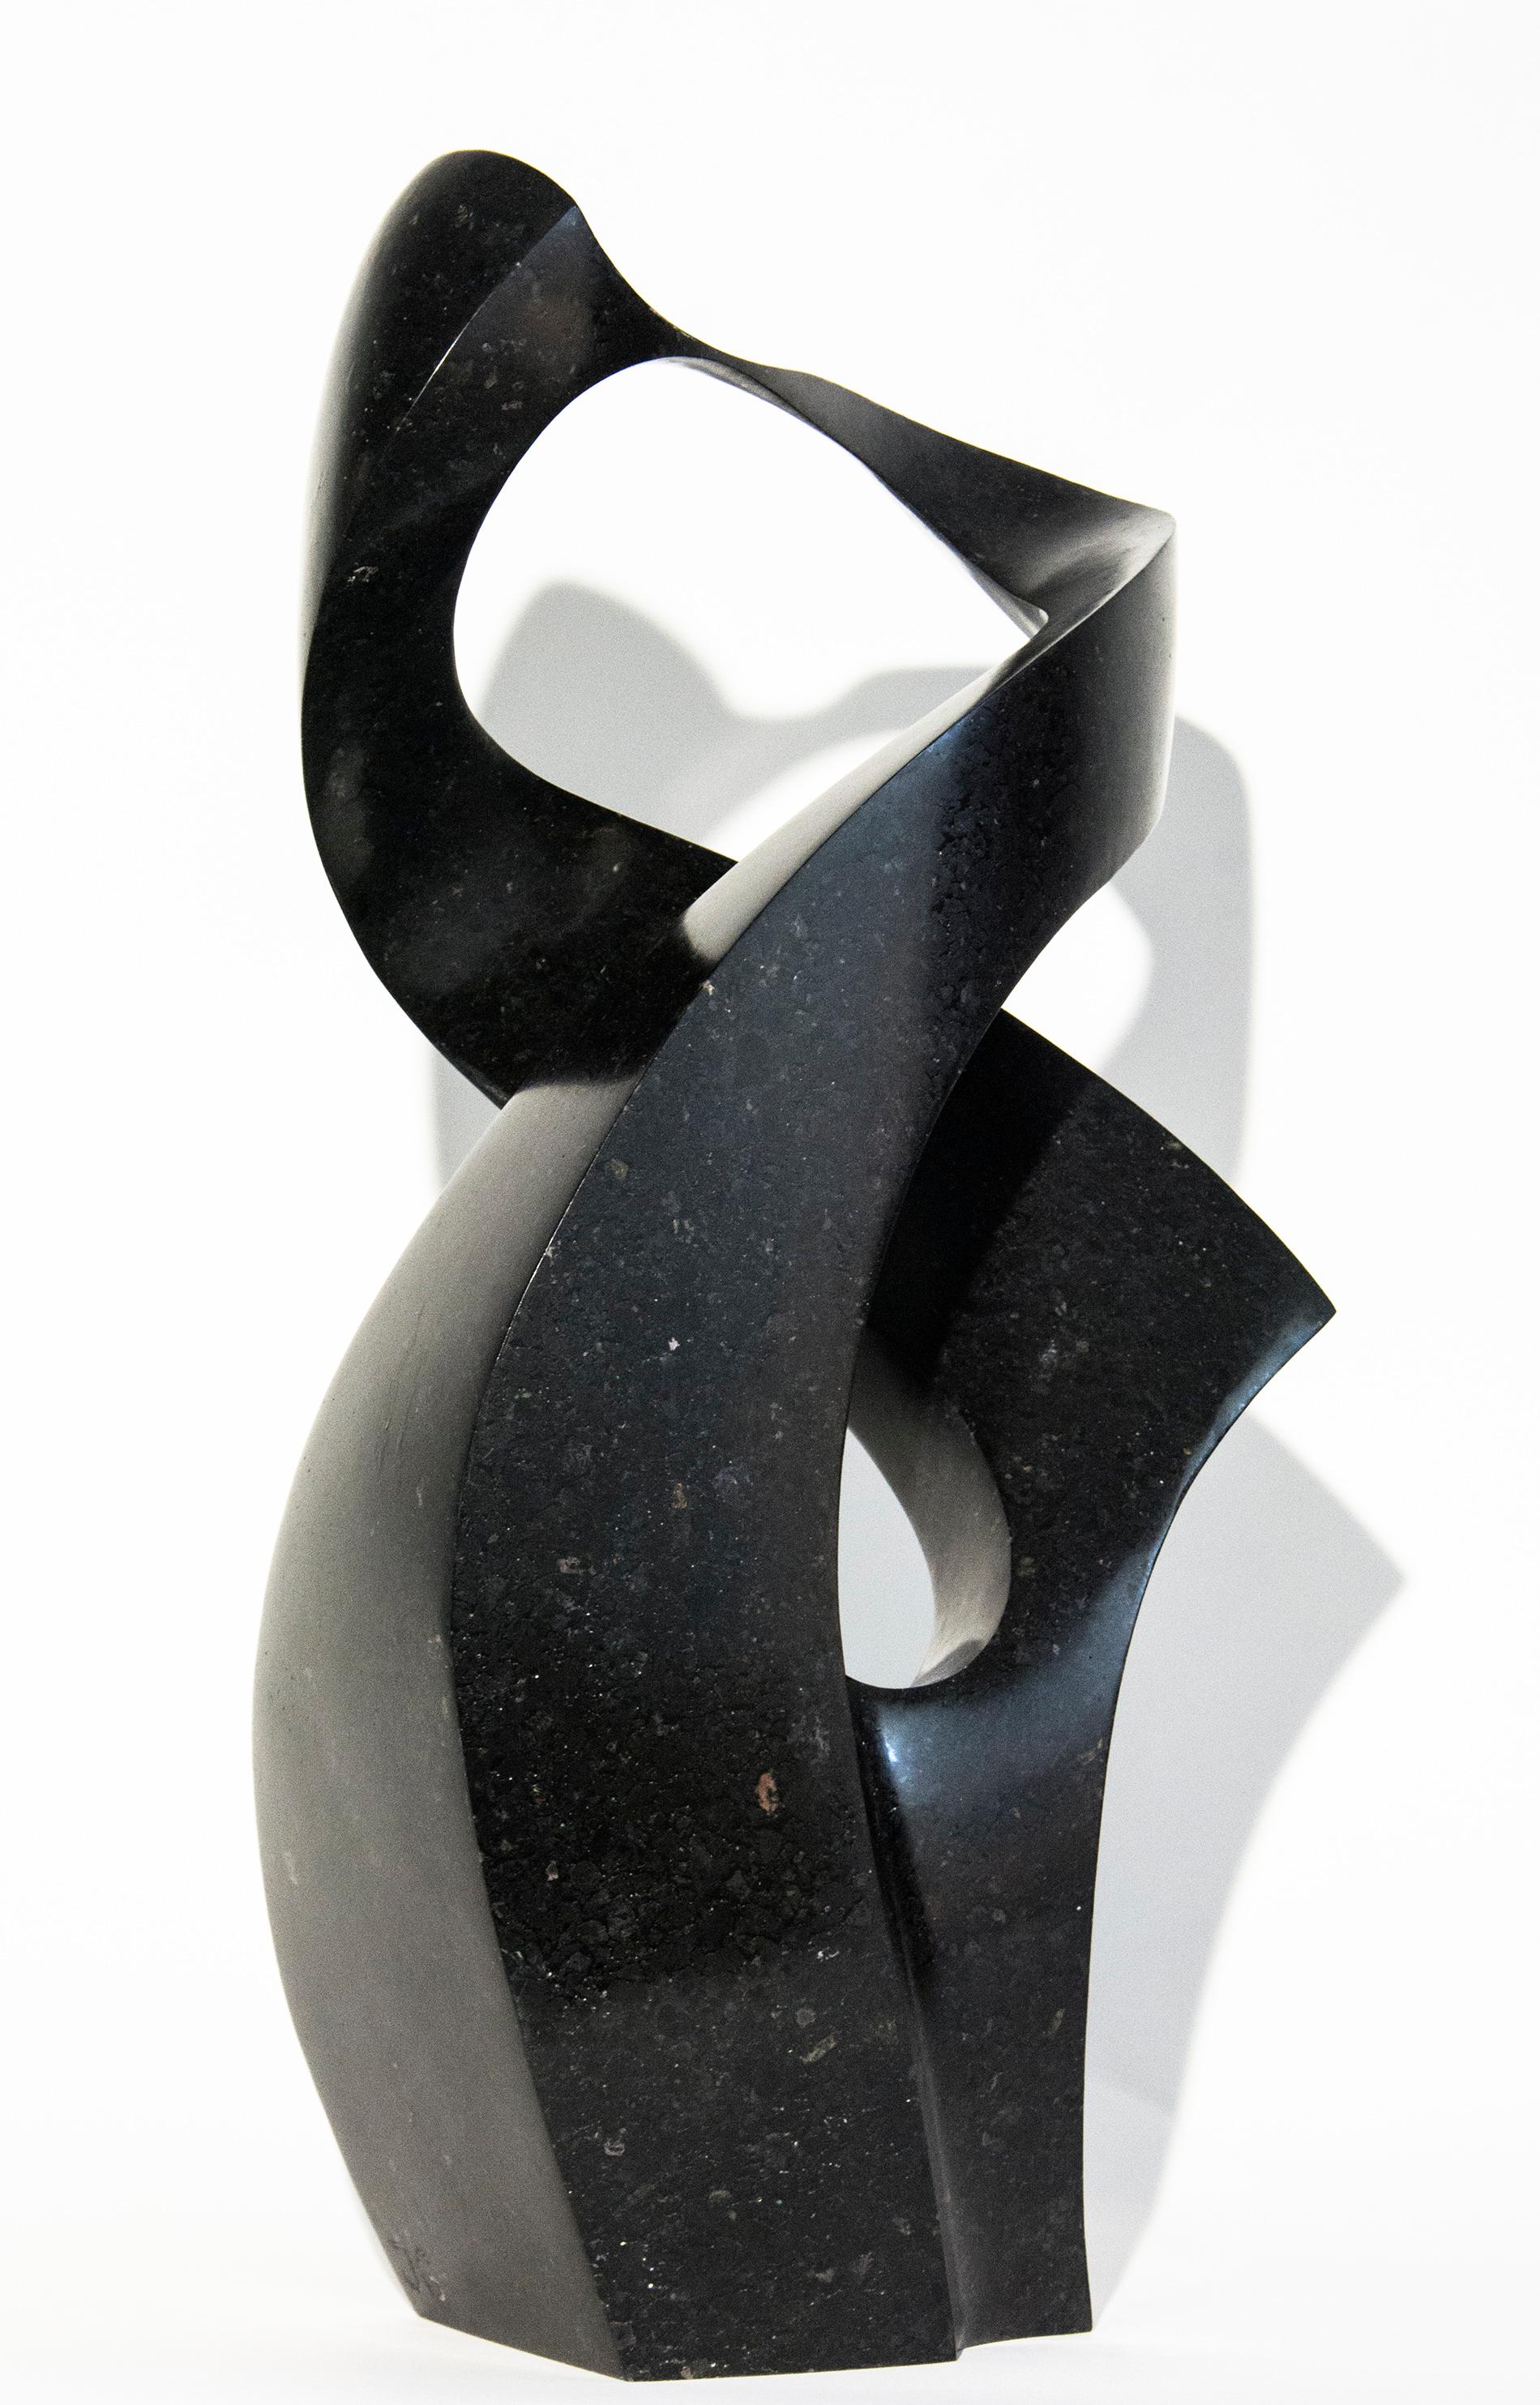 Embrace 3/50 - dark, smooth, polished, abstract, black granite sculpture 1